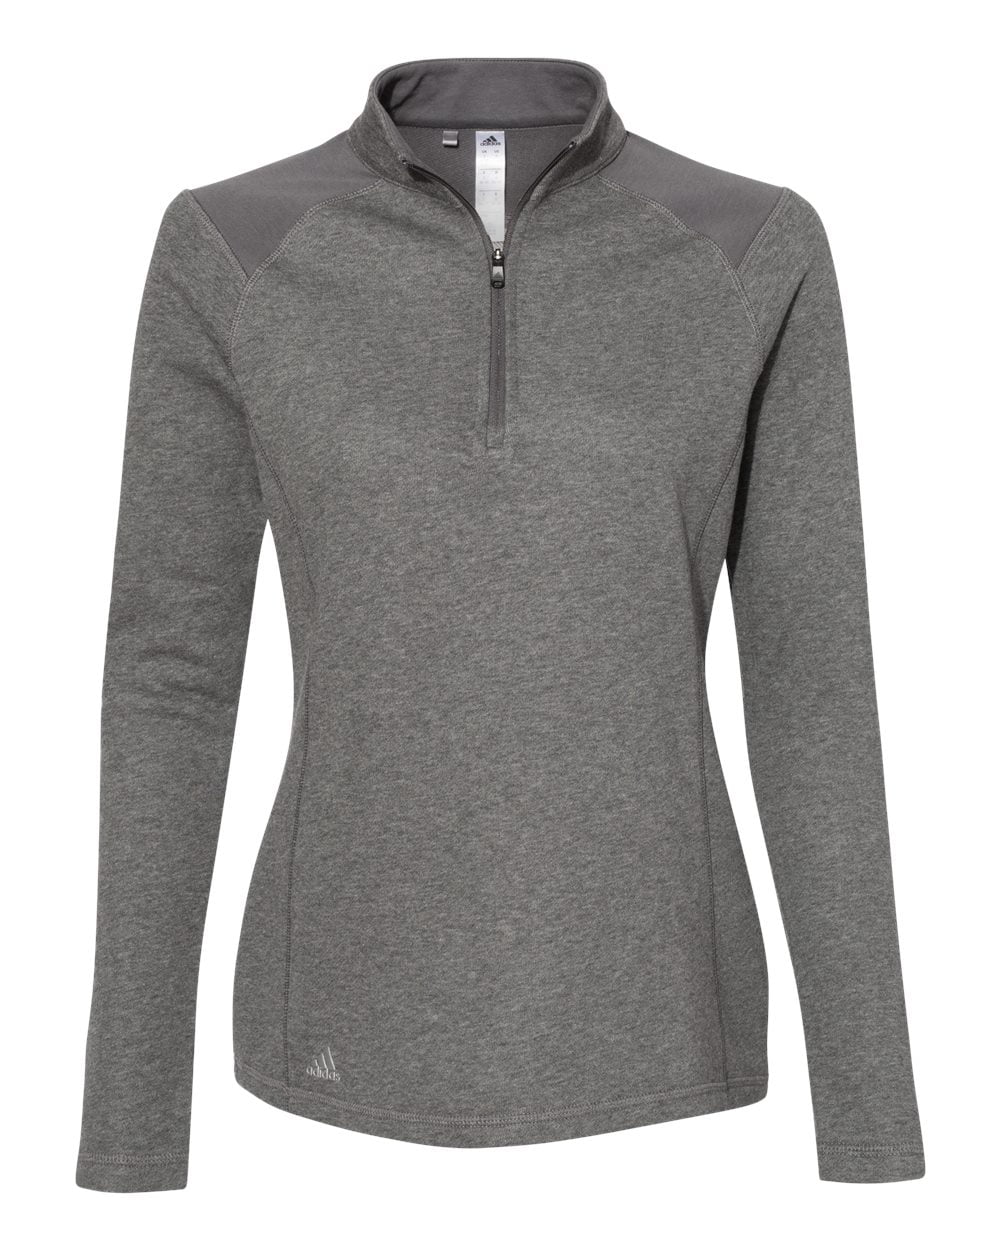 Adidas - Adidas - Women's Heathered Quarter Zip Pullover with ...